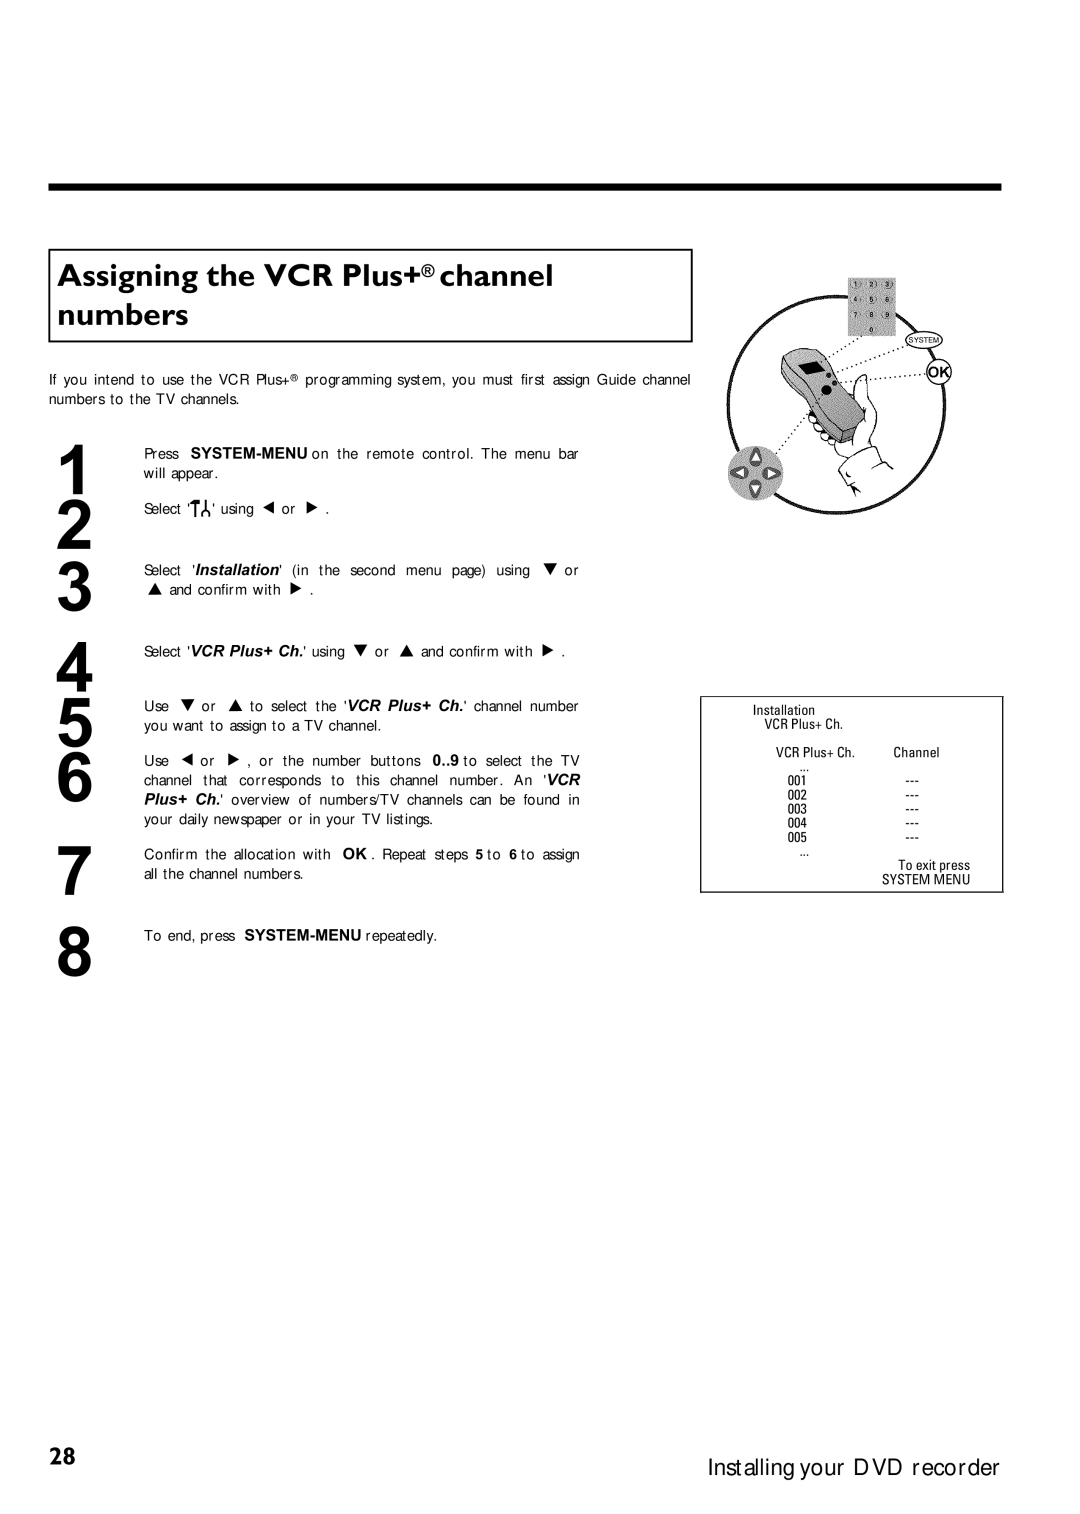 Magnavox MRV640 manual Assigning the VCR Plus+ channel numbers, Second menu page using B or 